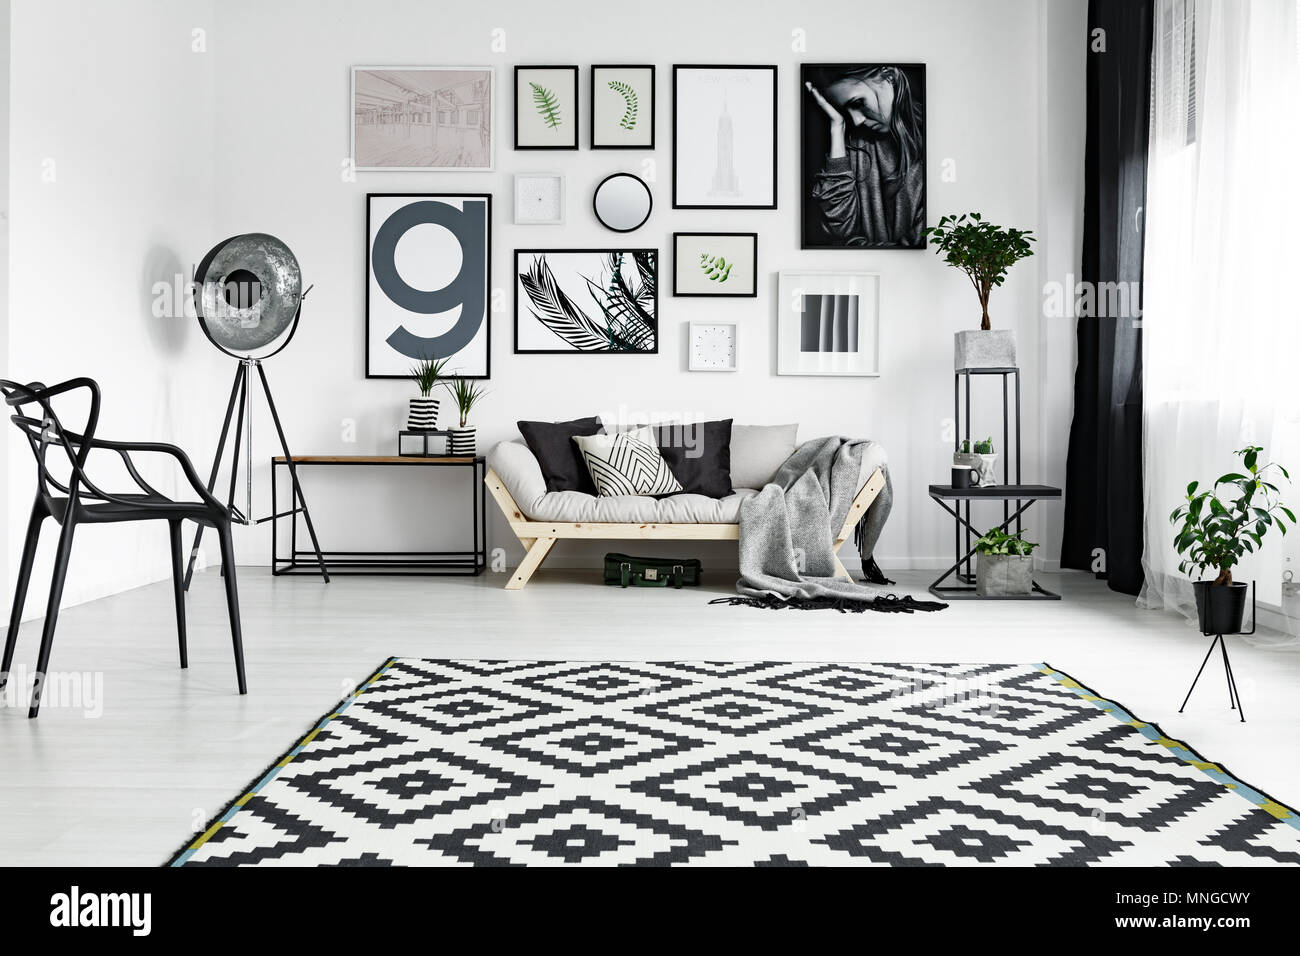 Fancy Furniture In Spacious Black And White Lounge Stock Photo Alamy